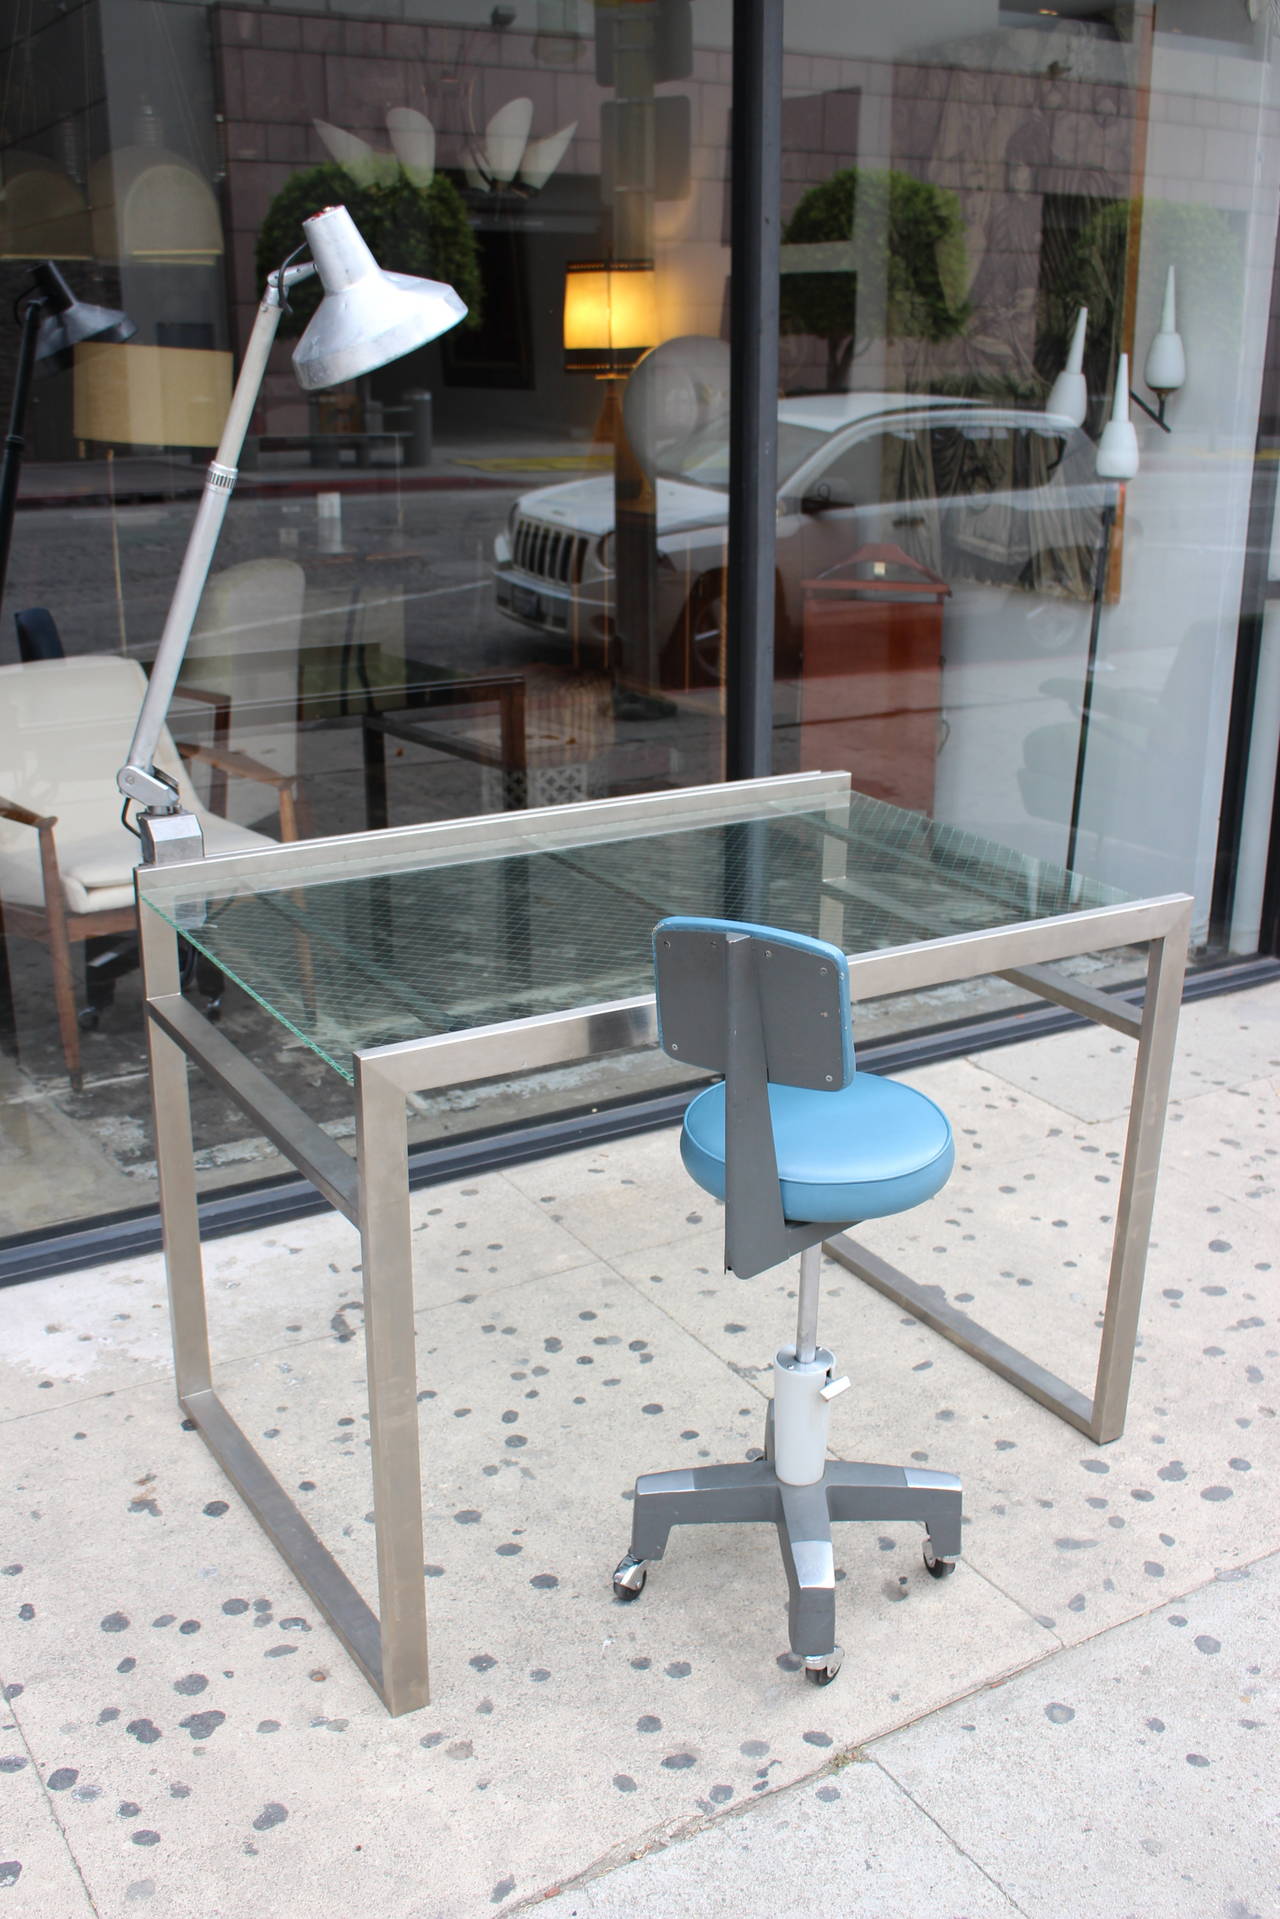 Adjustable chair with the white ceramic base, perfect scale for the working table. Wire mesh glass has a grid or mesh of thin metal wire embedded within the glass. Industrial desk lamp adjustable height and angle. Stainless steel desk.
Sign